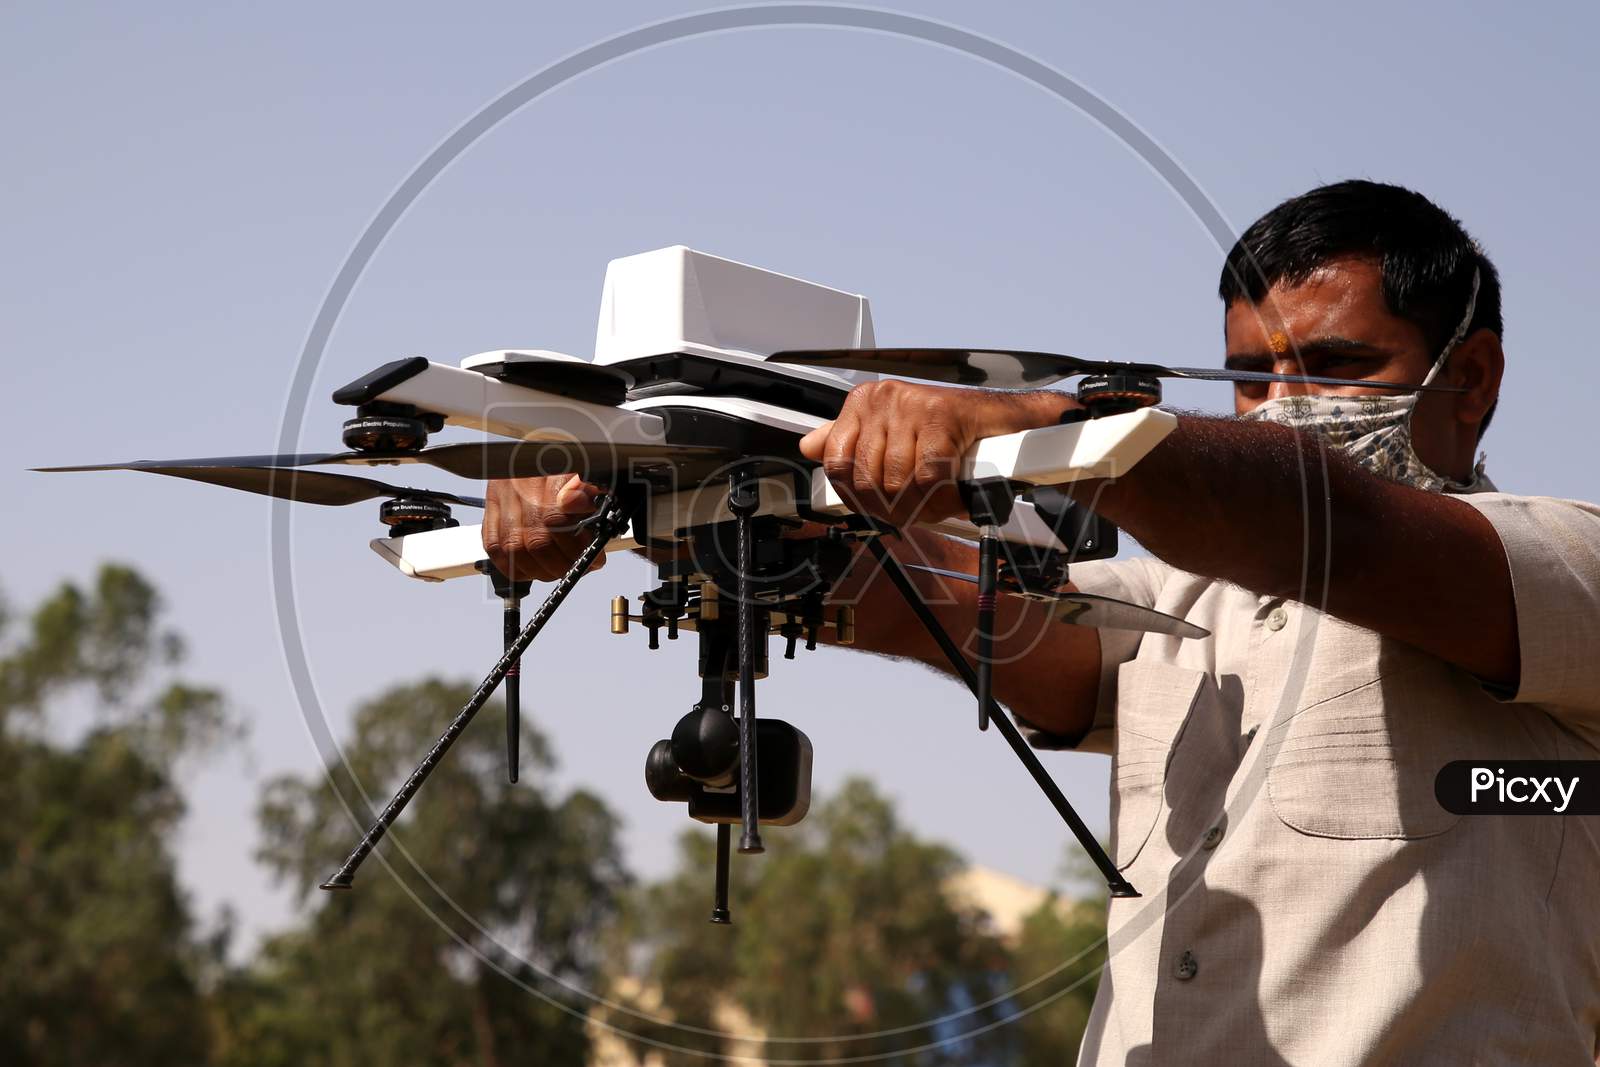 A Police Personnel Prepares To Check A Drone For Surveilling A Hotspot Area During A Government-Imposed Nationwide Lockdown As A Preventive Measure Against The Covid-19 Coronavirus, In Ajmer, Rajasthan, India On 02 May 2020.